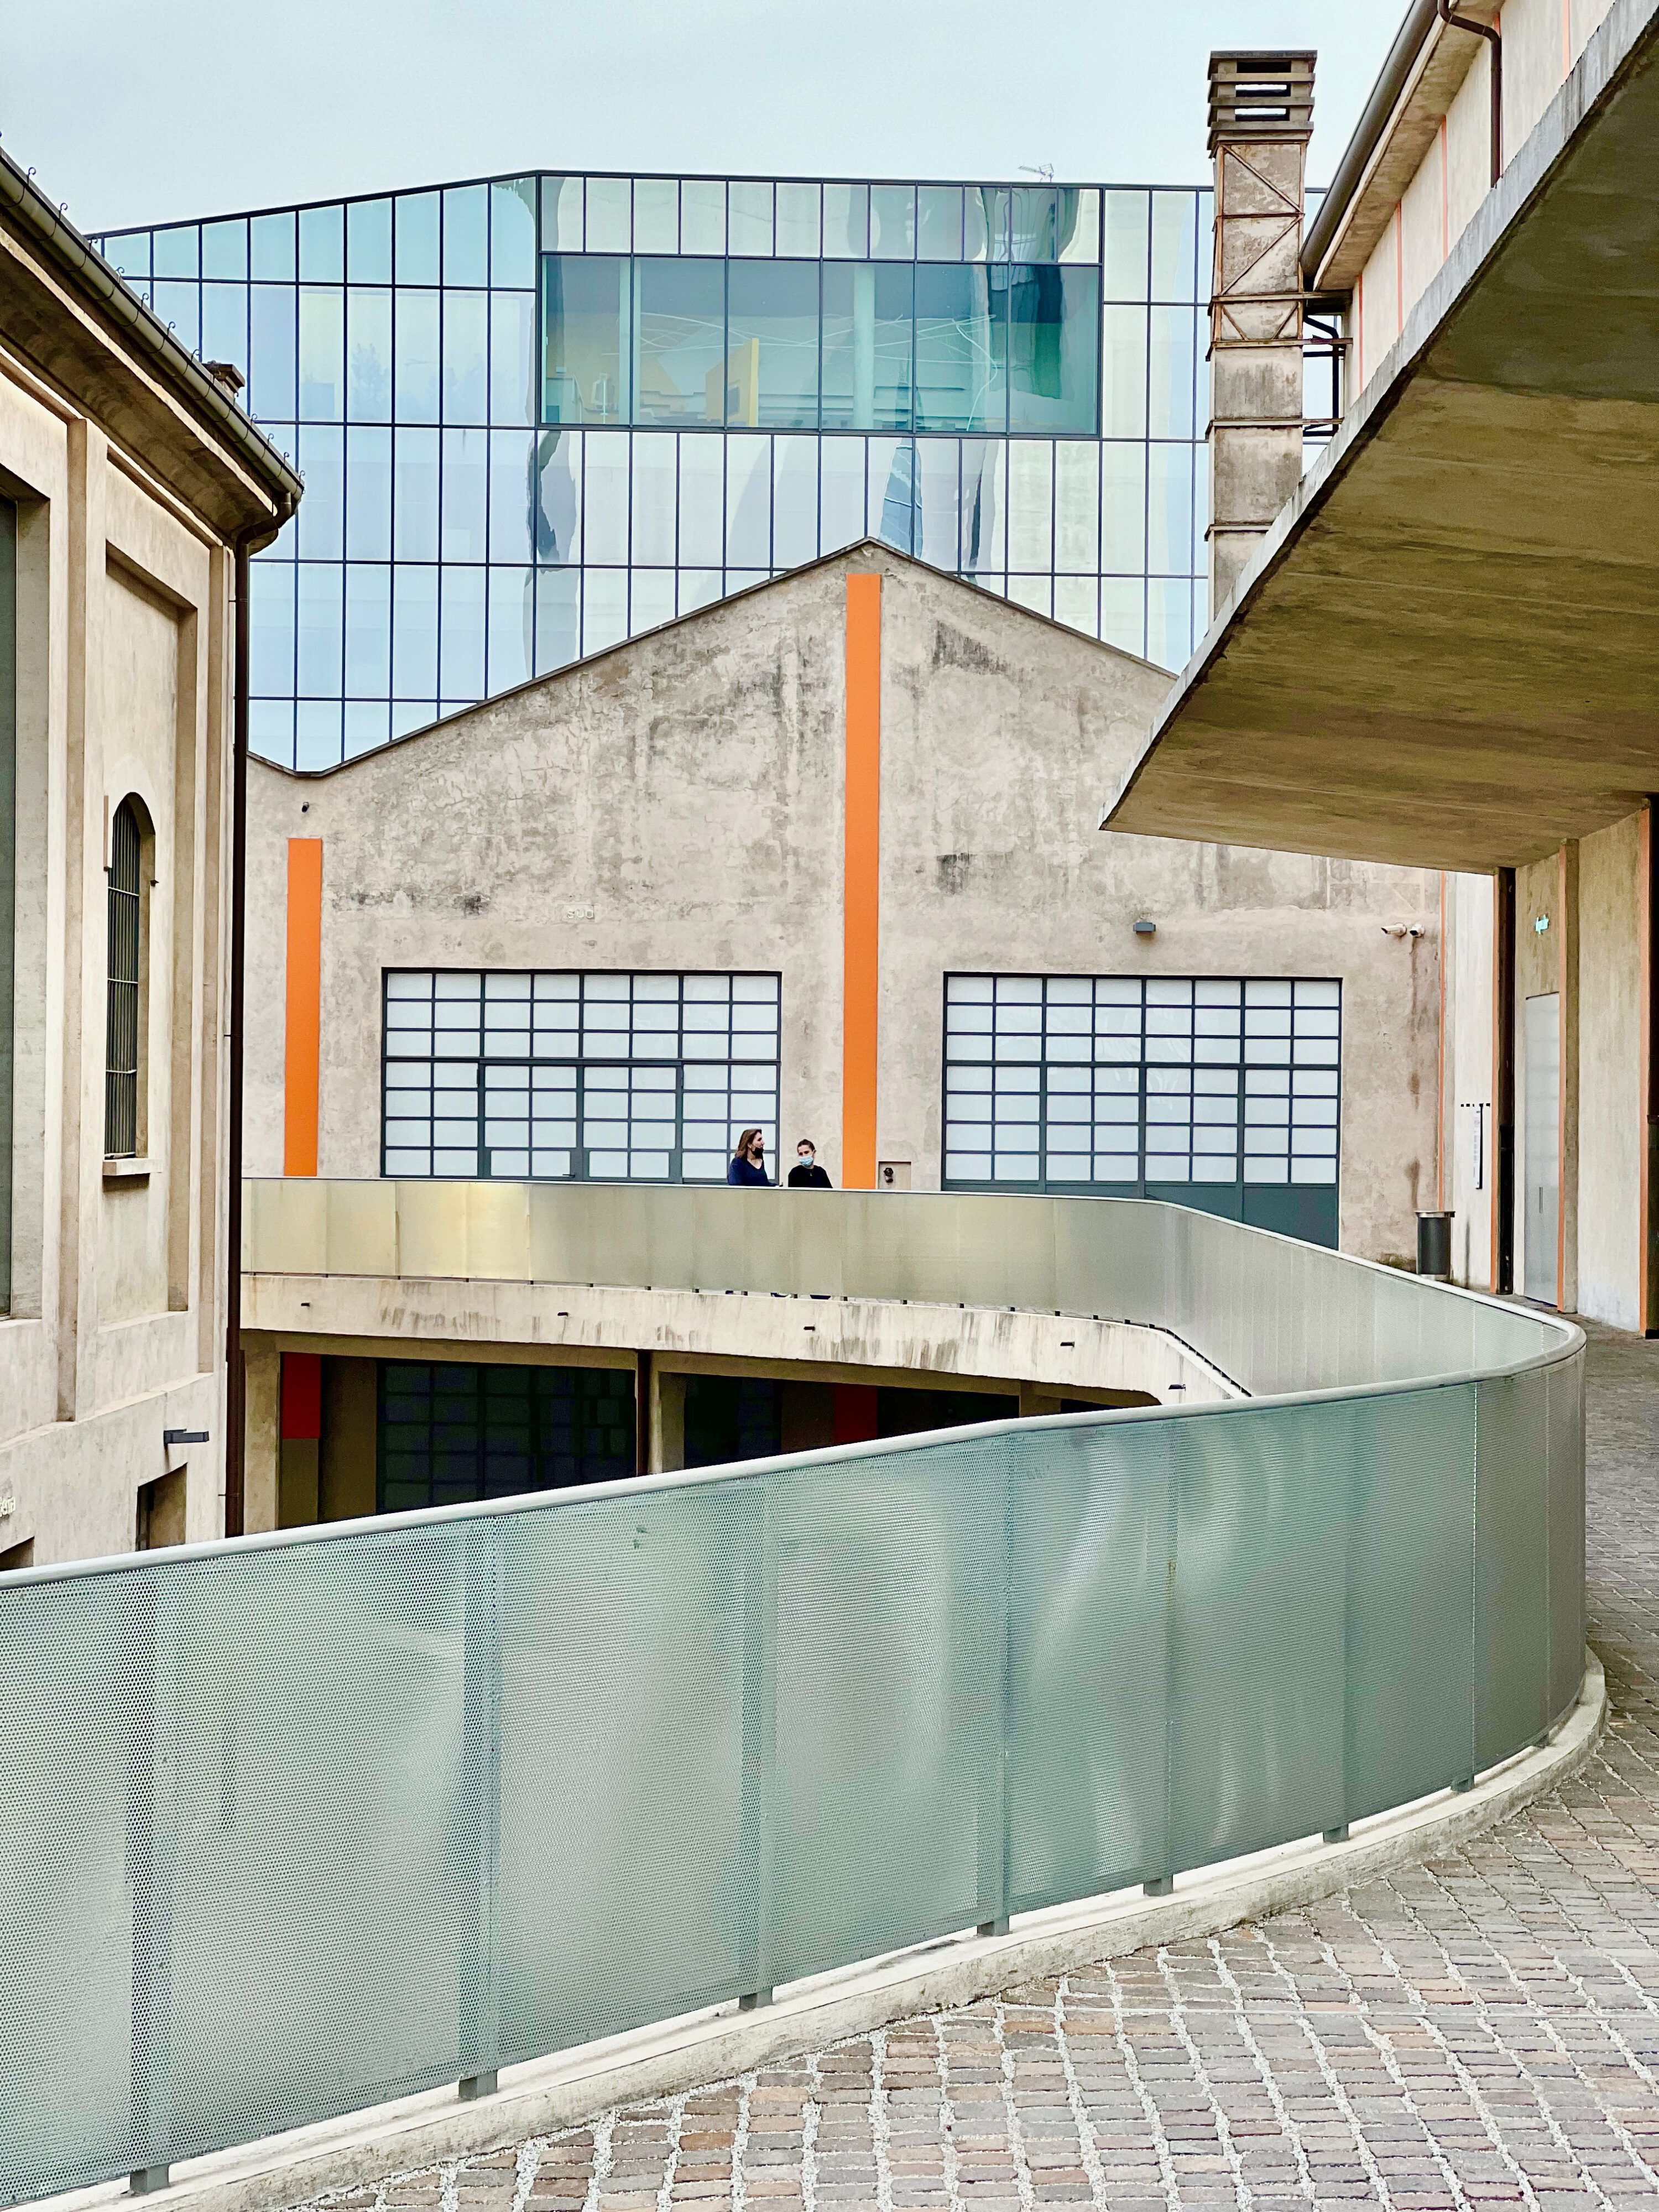 The Milan venue of Fondazione Prada consisting of seven historic factory buildings and three buildings designed by Koolhaas